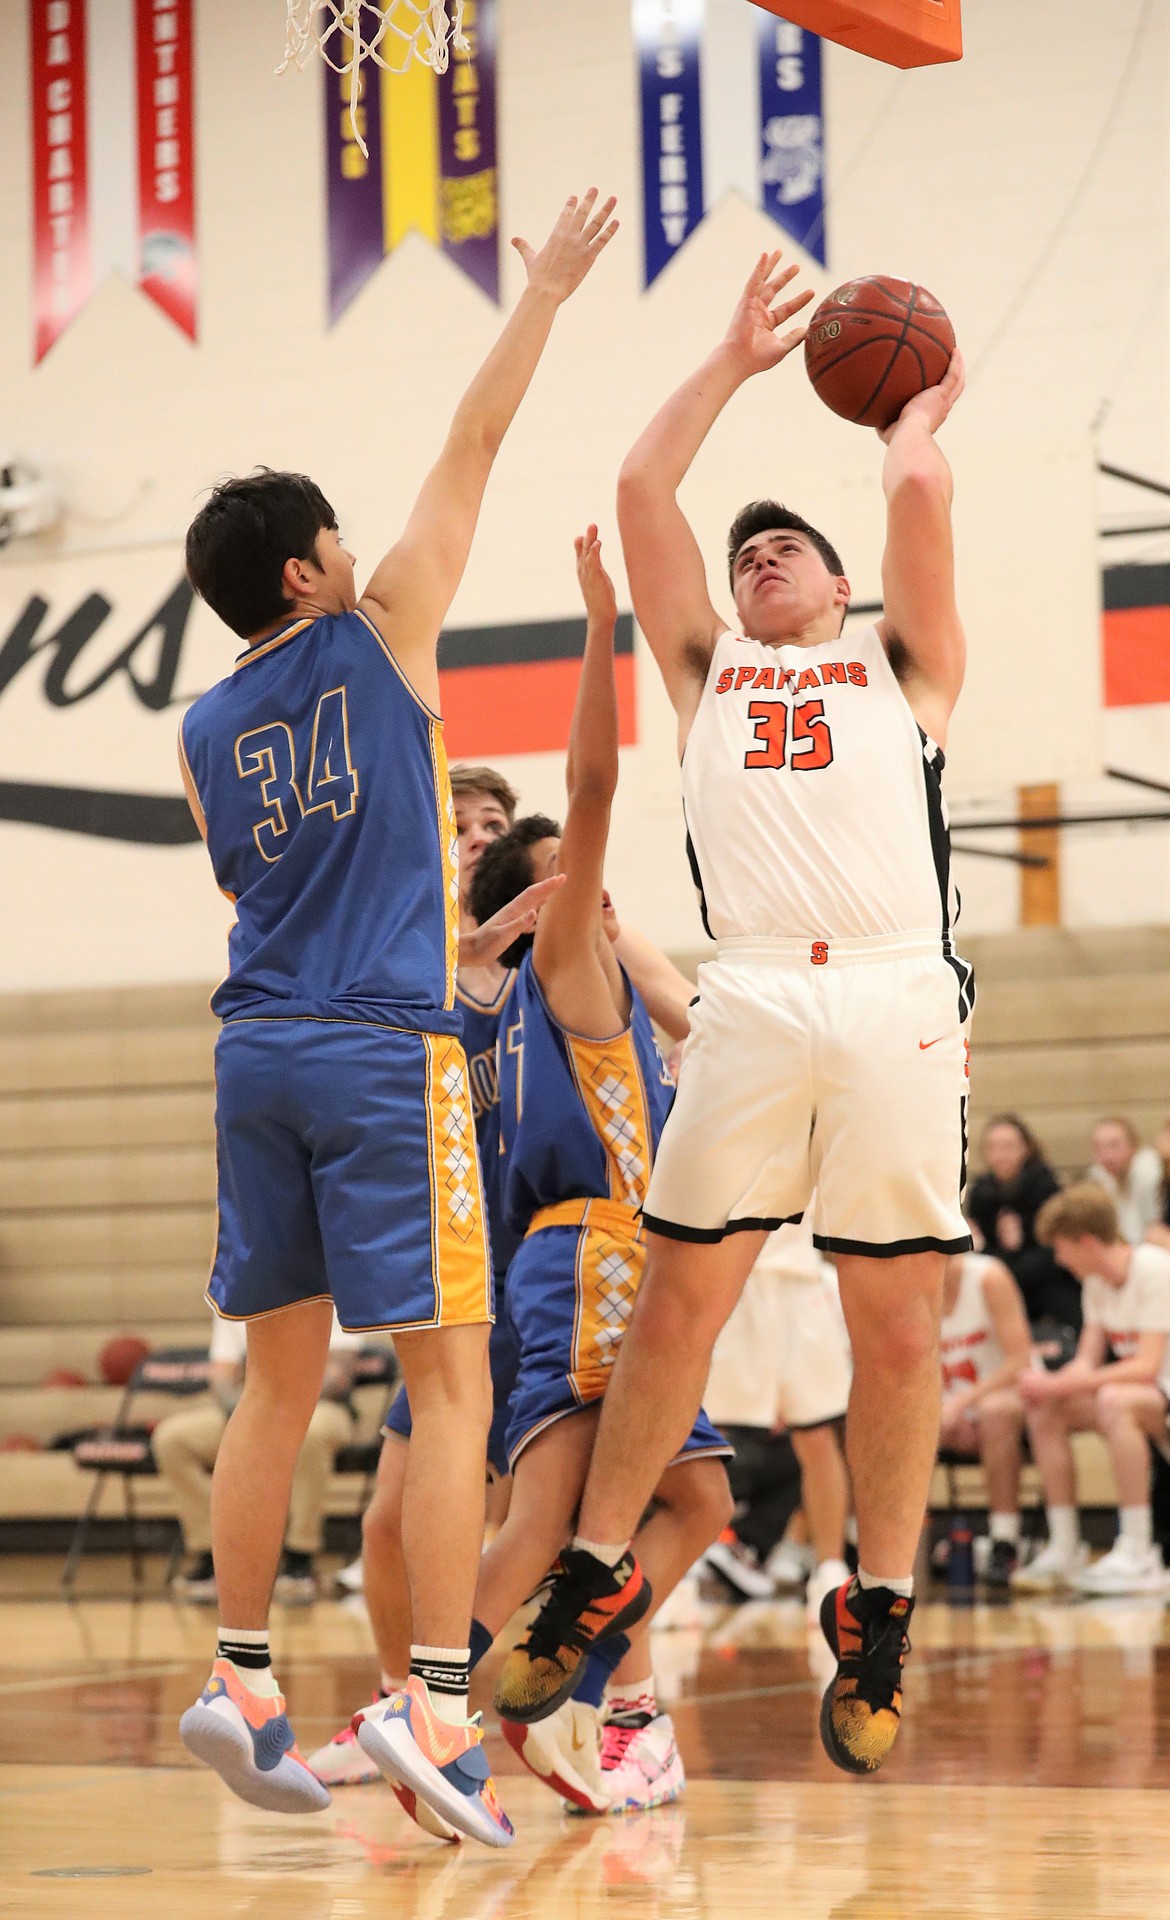 Sophomore Jace Yount attempts a shot during the second half of Monday's game.